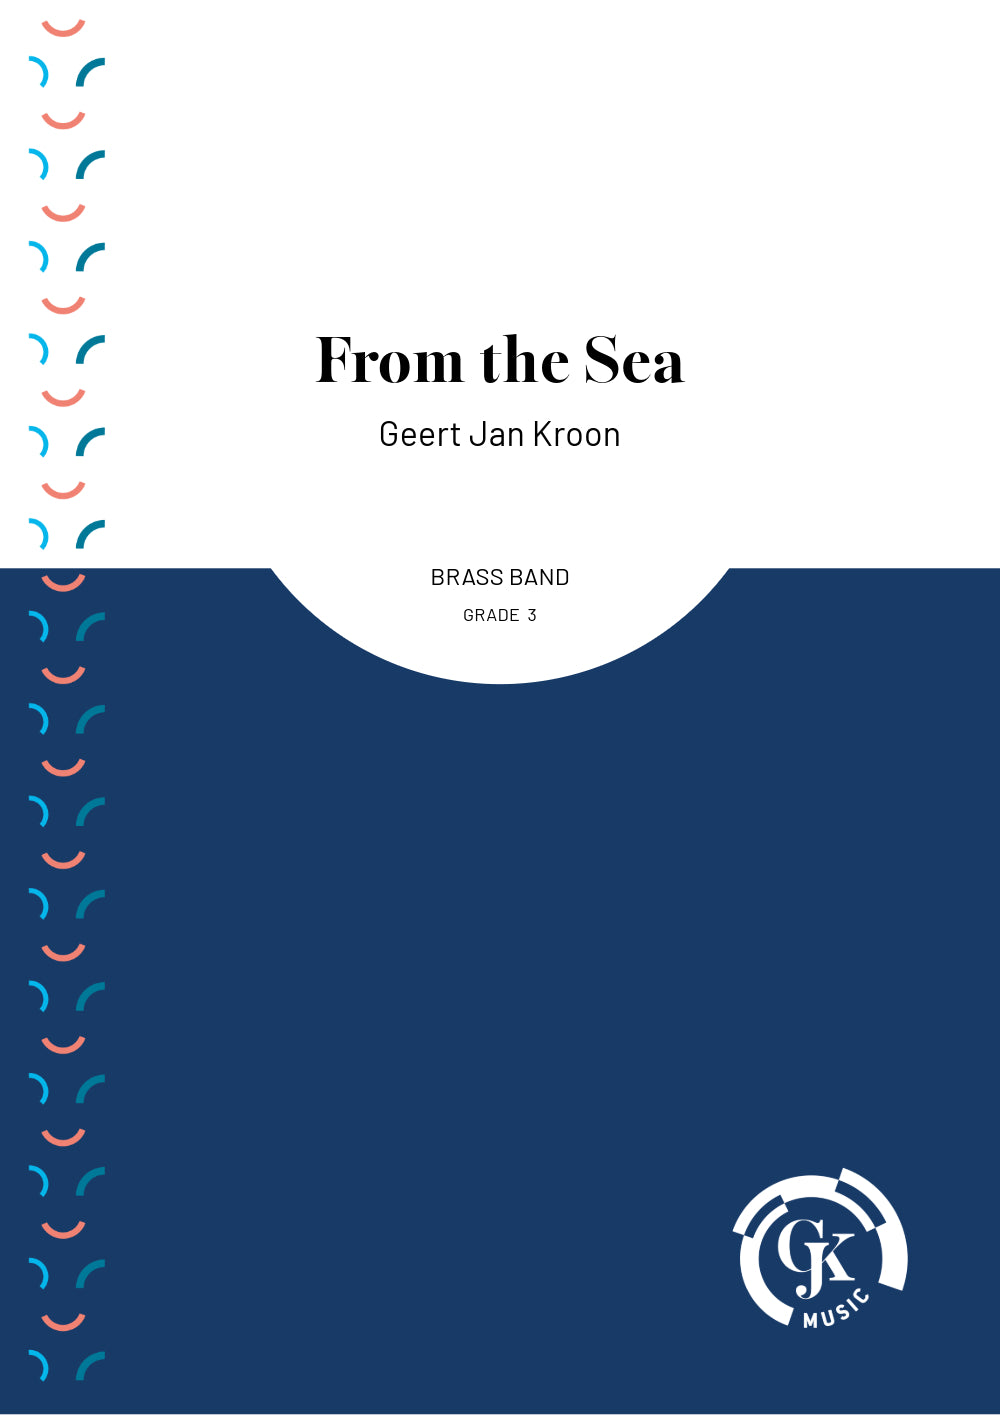 From the Sea - Brass Band